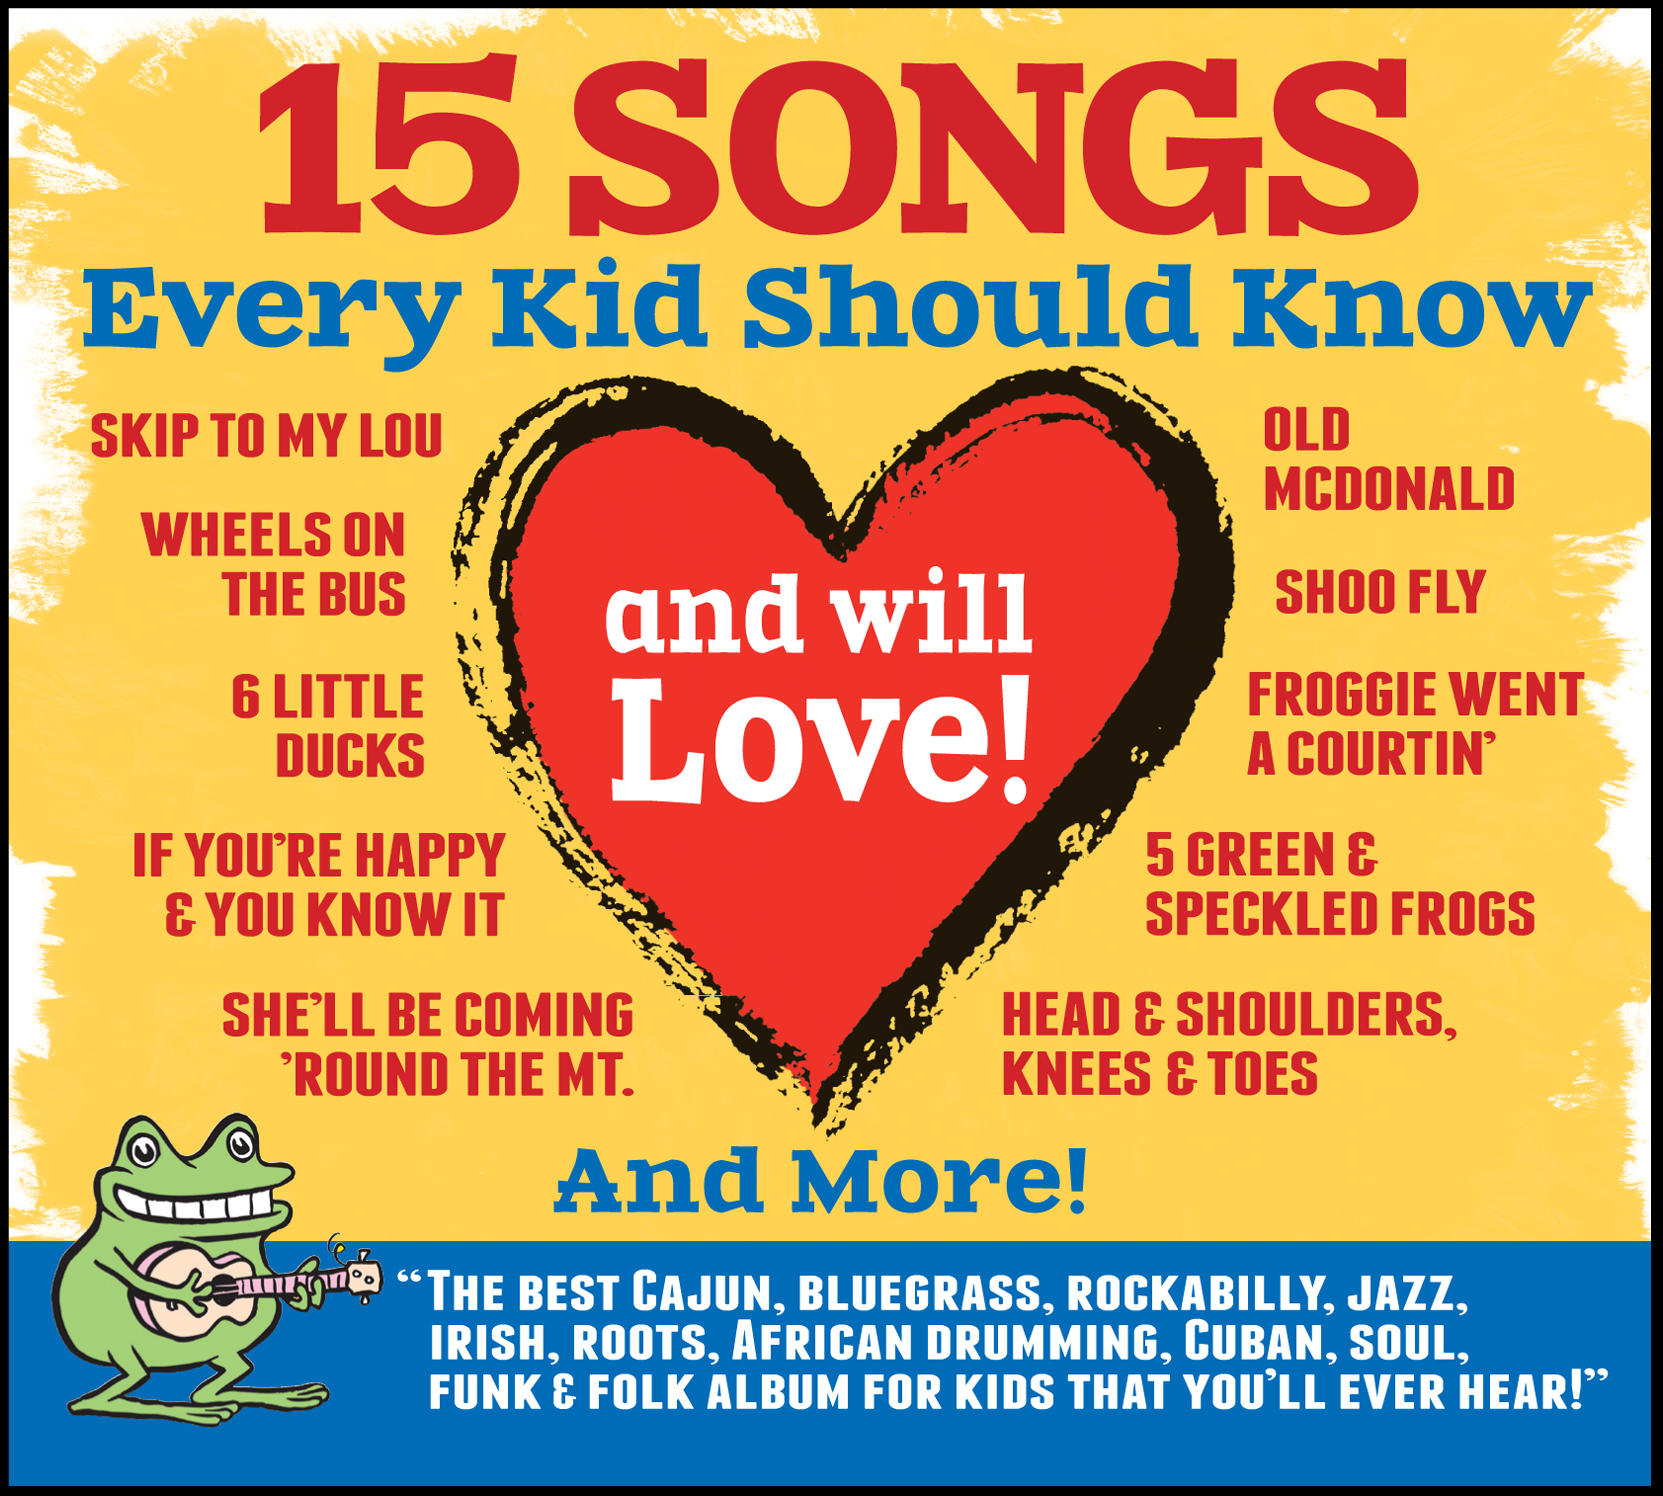 15 Songs Every Kid Should Know CD Release & Review